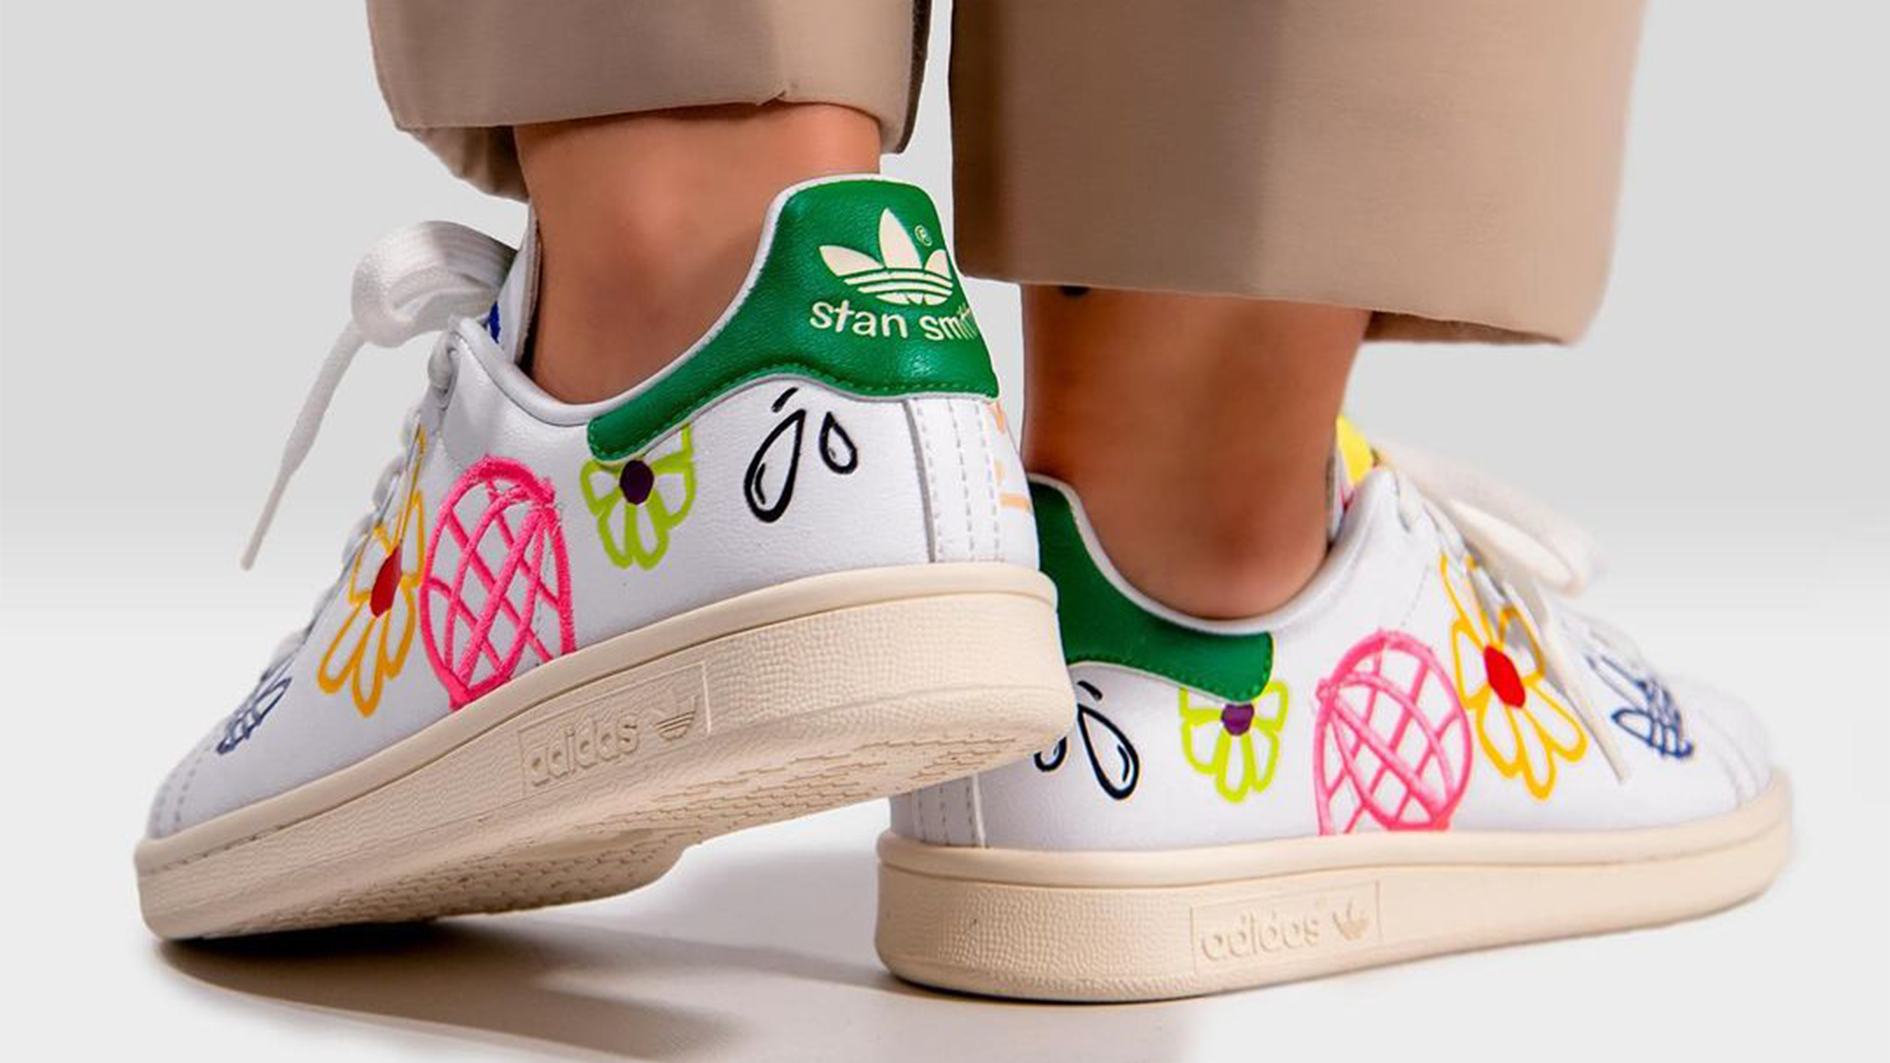 Kæledyr fysisk springvand adidas Stan Smith Sizing: How Do They Fit? | The Sole Supplier